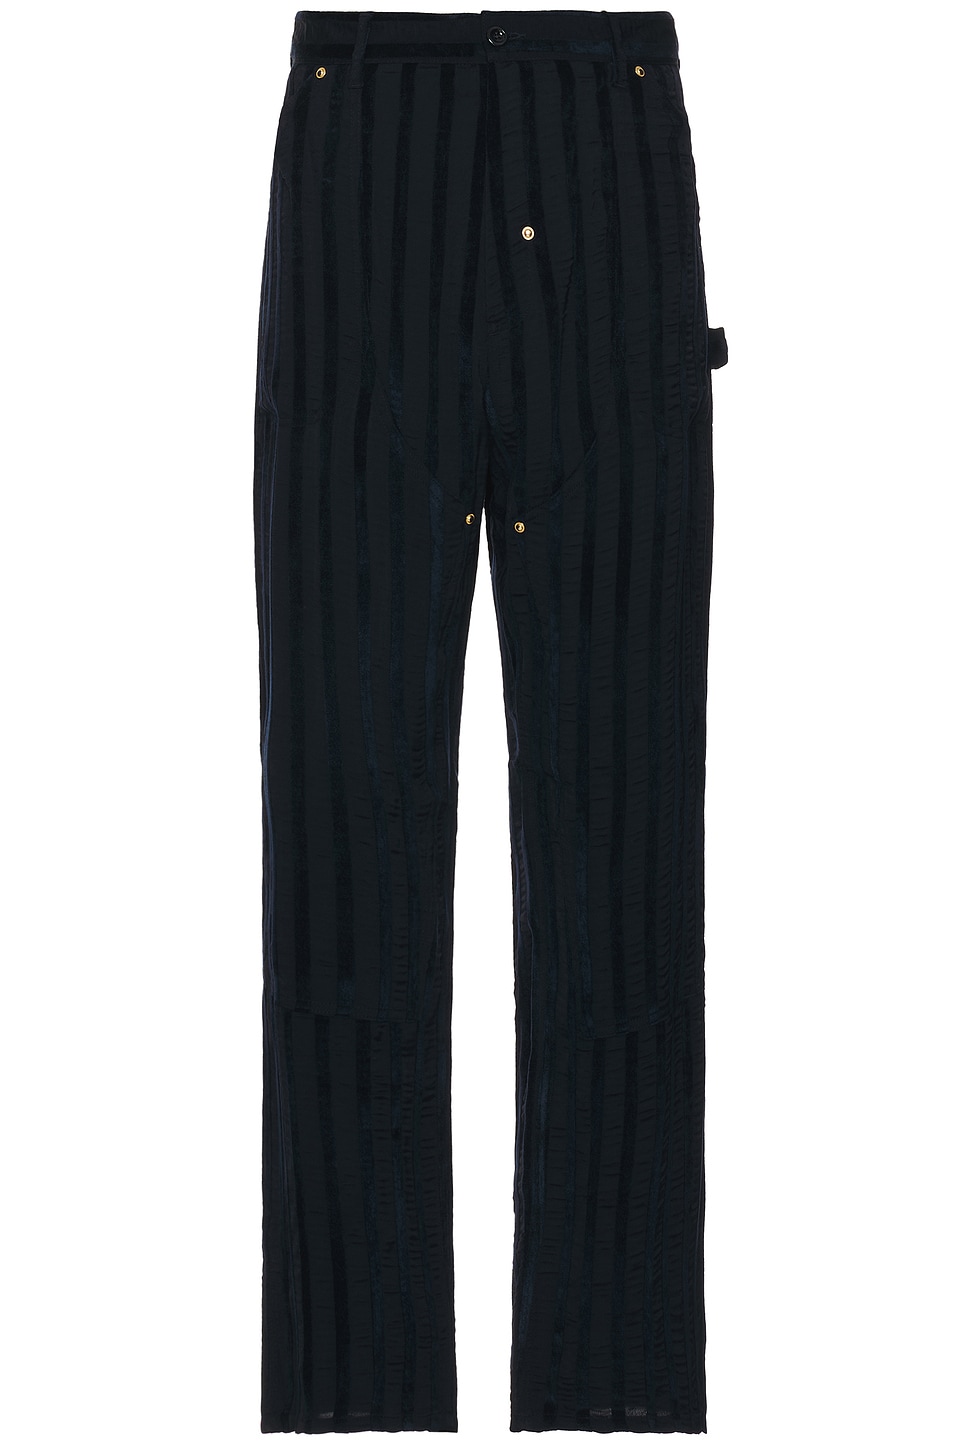 Image 1 of 4SDESIGNS Utility Pant in Navy